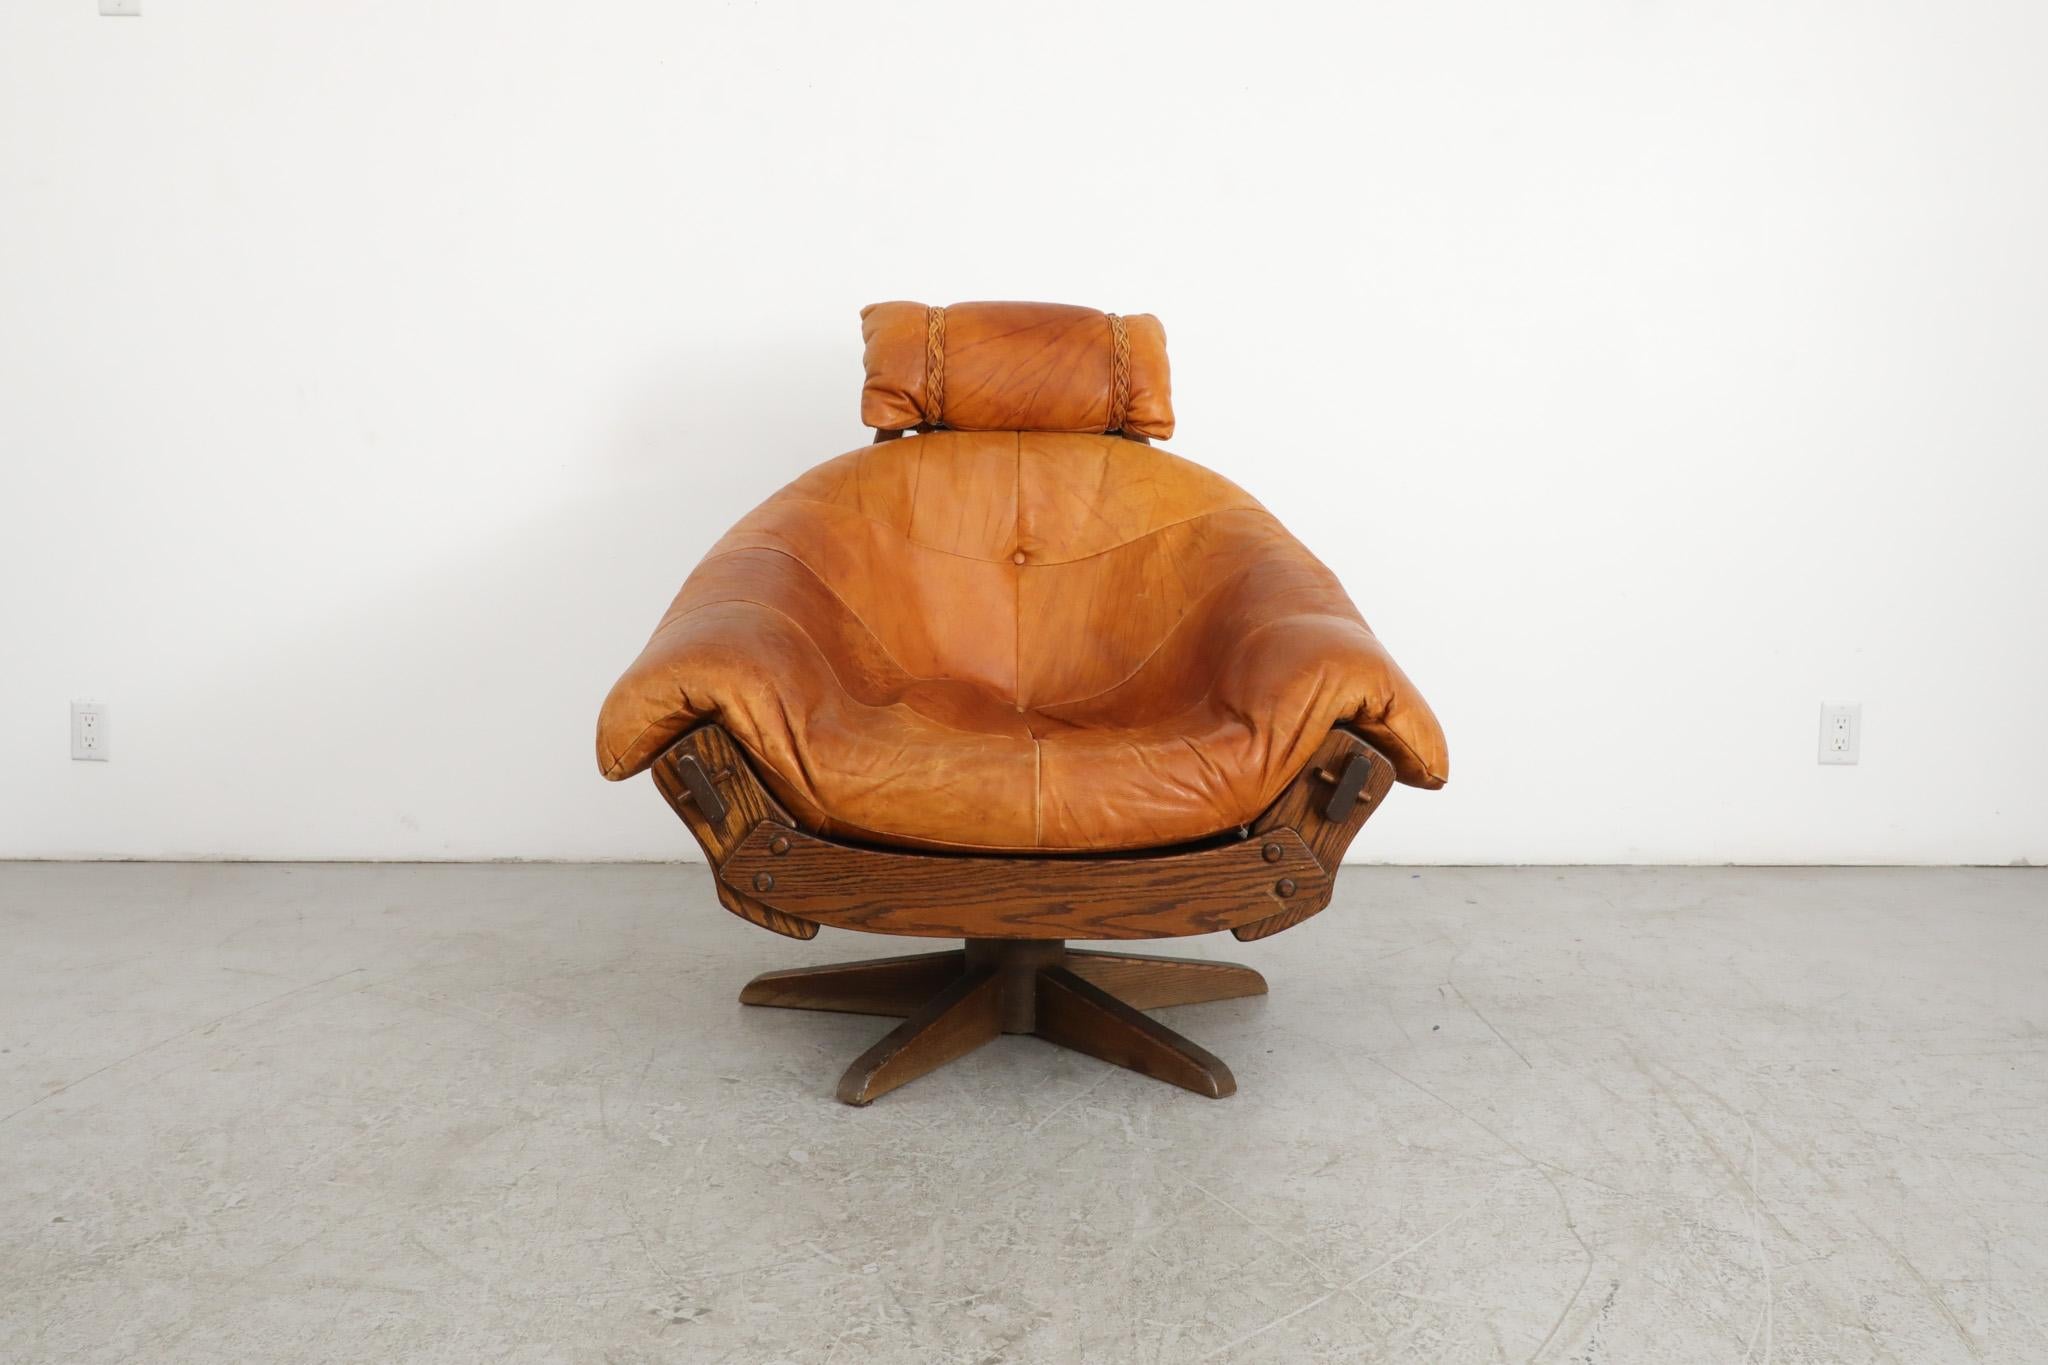 Handsome mid-century Jean Gillon style swivel lounge chair with cognac leather cushions on a Brutalist natural oak wood frame. A striking and stylish statement piece lounge with lovely patina and attractive grain pattern. In original condition with